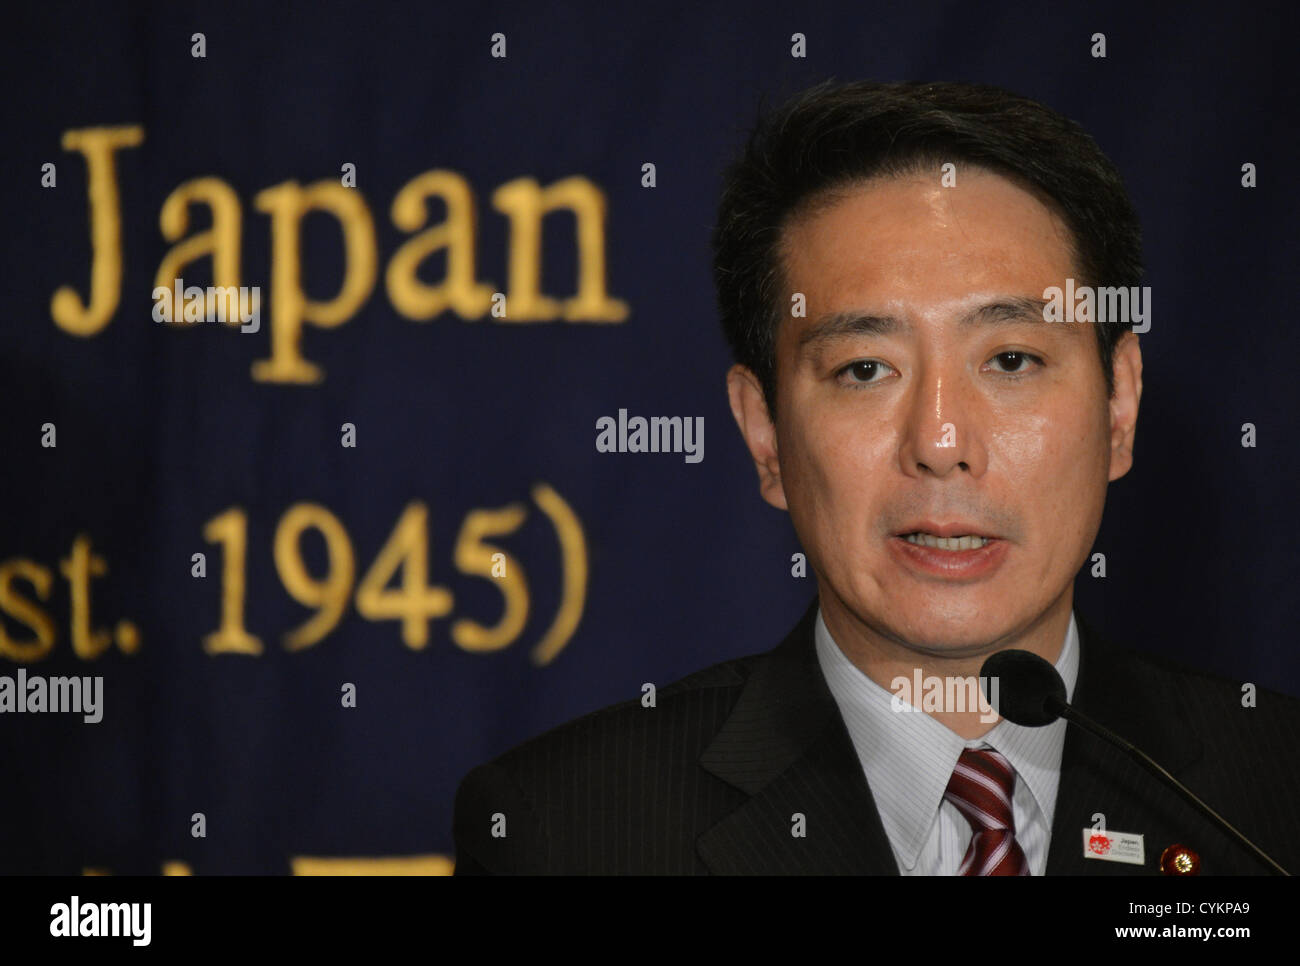 November 7, 2012, Tokyo, Japan - Japan's Economics Minister Seiji Maehara speaks during a news conference at Tokyo's Foreign Correspondents' Club of Japan on Wednesday, November 7, 2012. Maehara said Japan's economic situation needs powerful monetary easing in its fight against deflation.  (Photo by Natsuki Sakai/AFLO) AYF -mis- Stock Photo